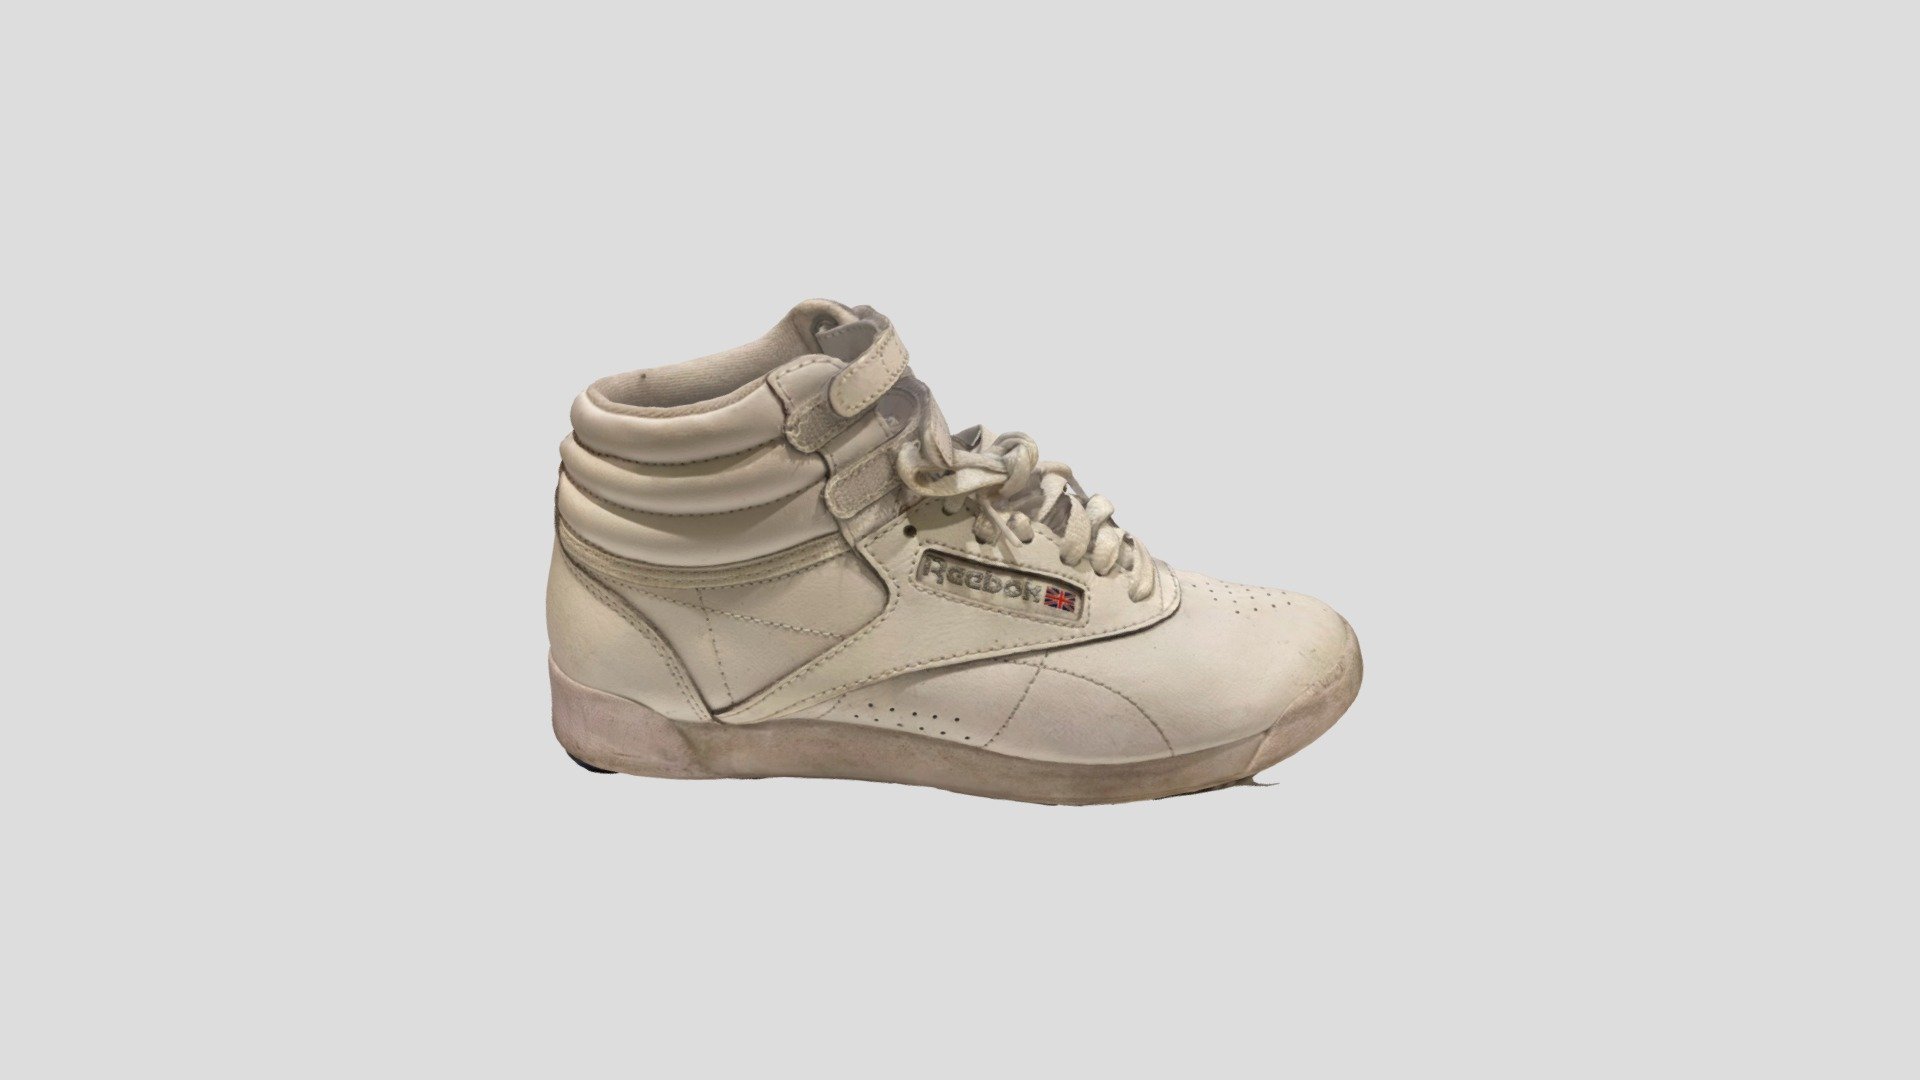 A woman's hi-top Reebok trainer. White with a little bit of dirt. Laces and velcro straps. Very stylish, for use in a girl or woman's bedroom, gym or sports scene 3d model